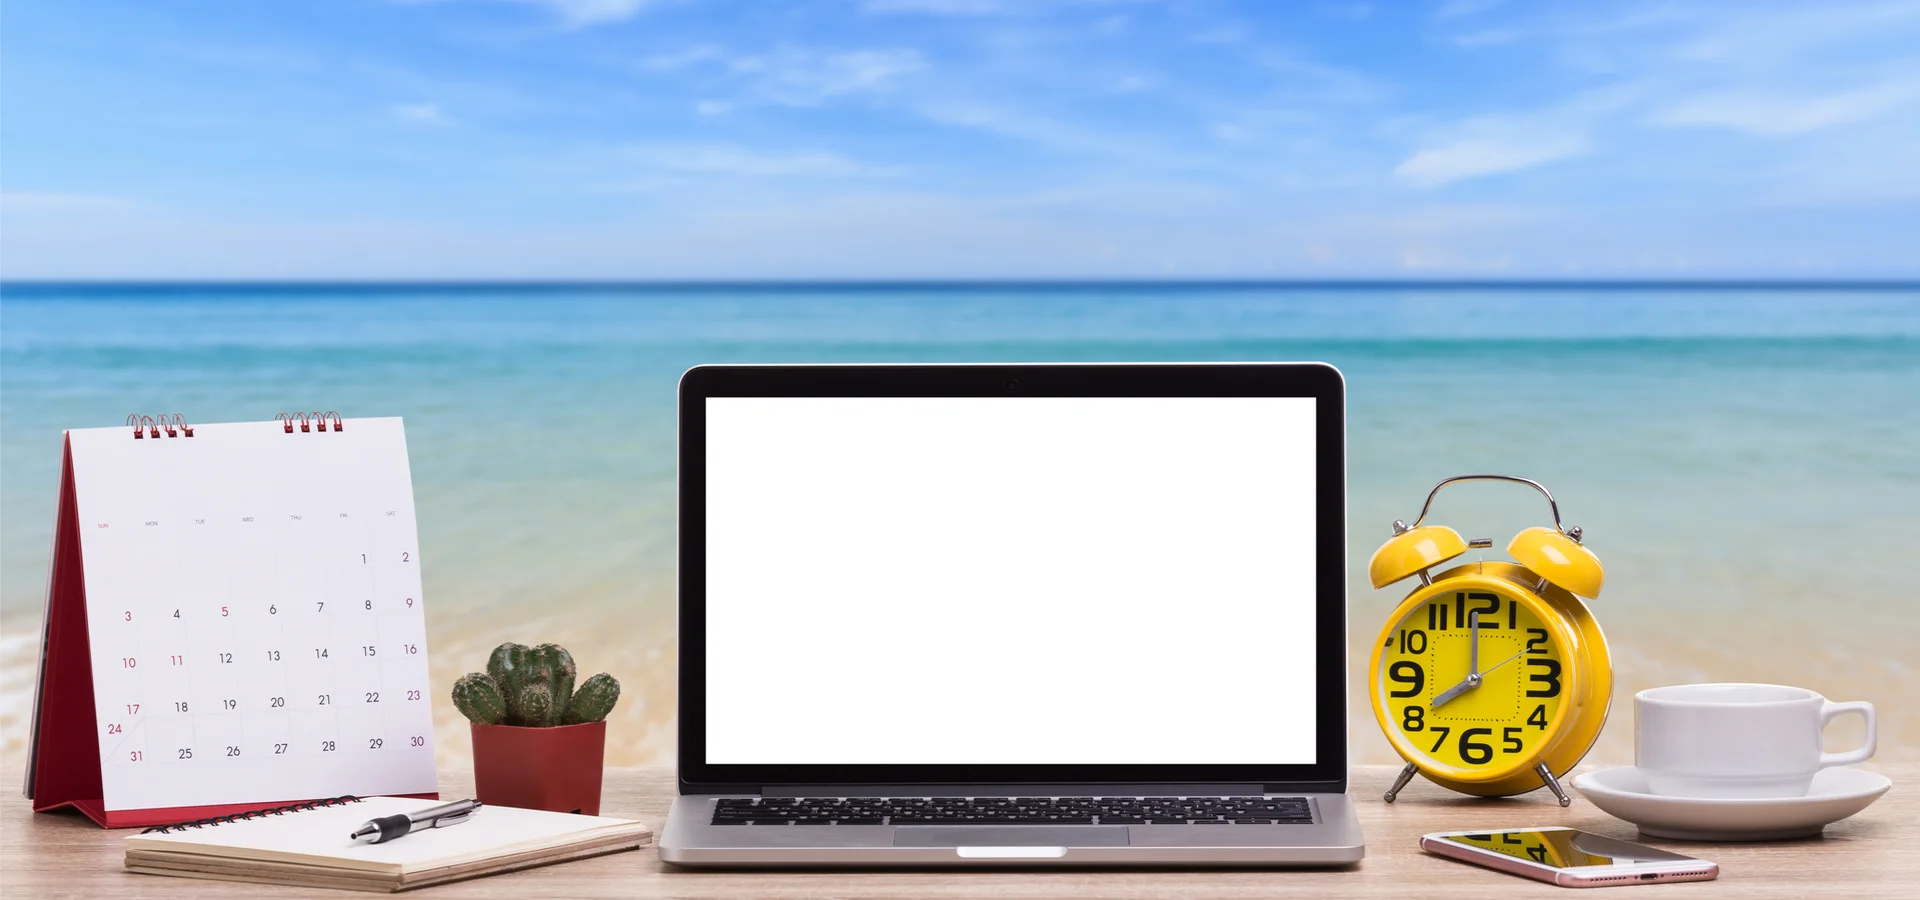 Dreamt of Working from The Beach? Now Make This a Reality